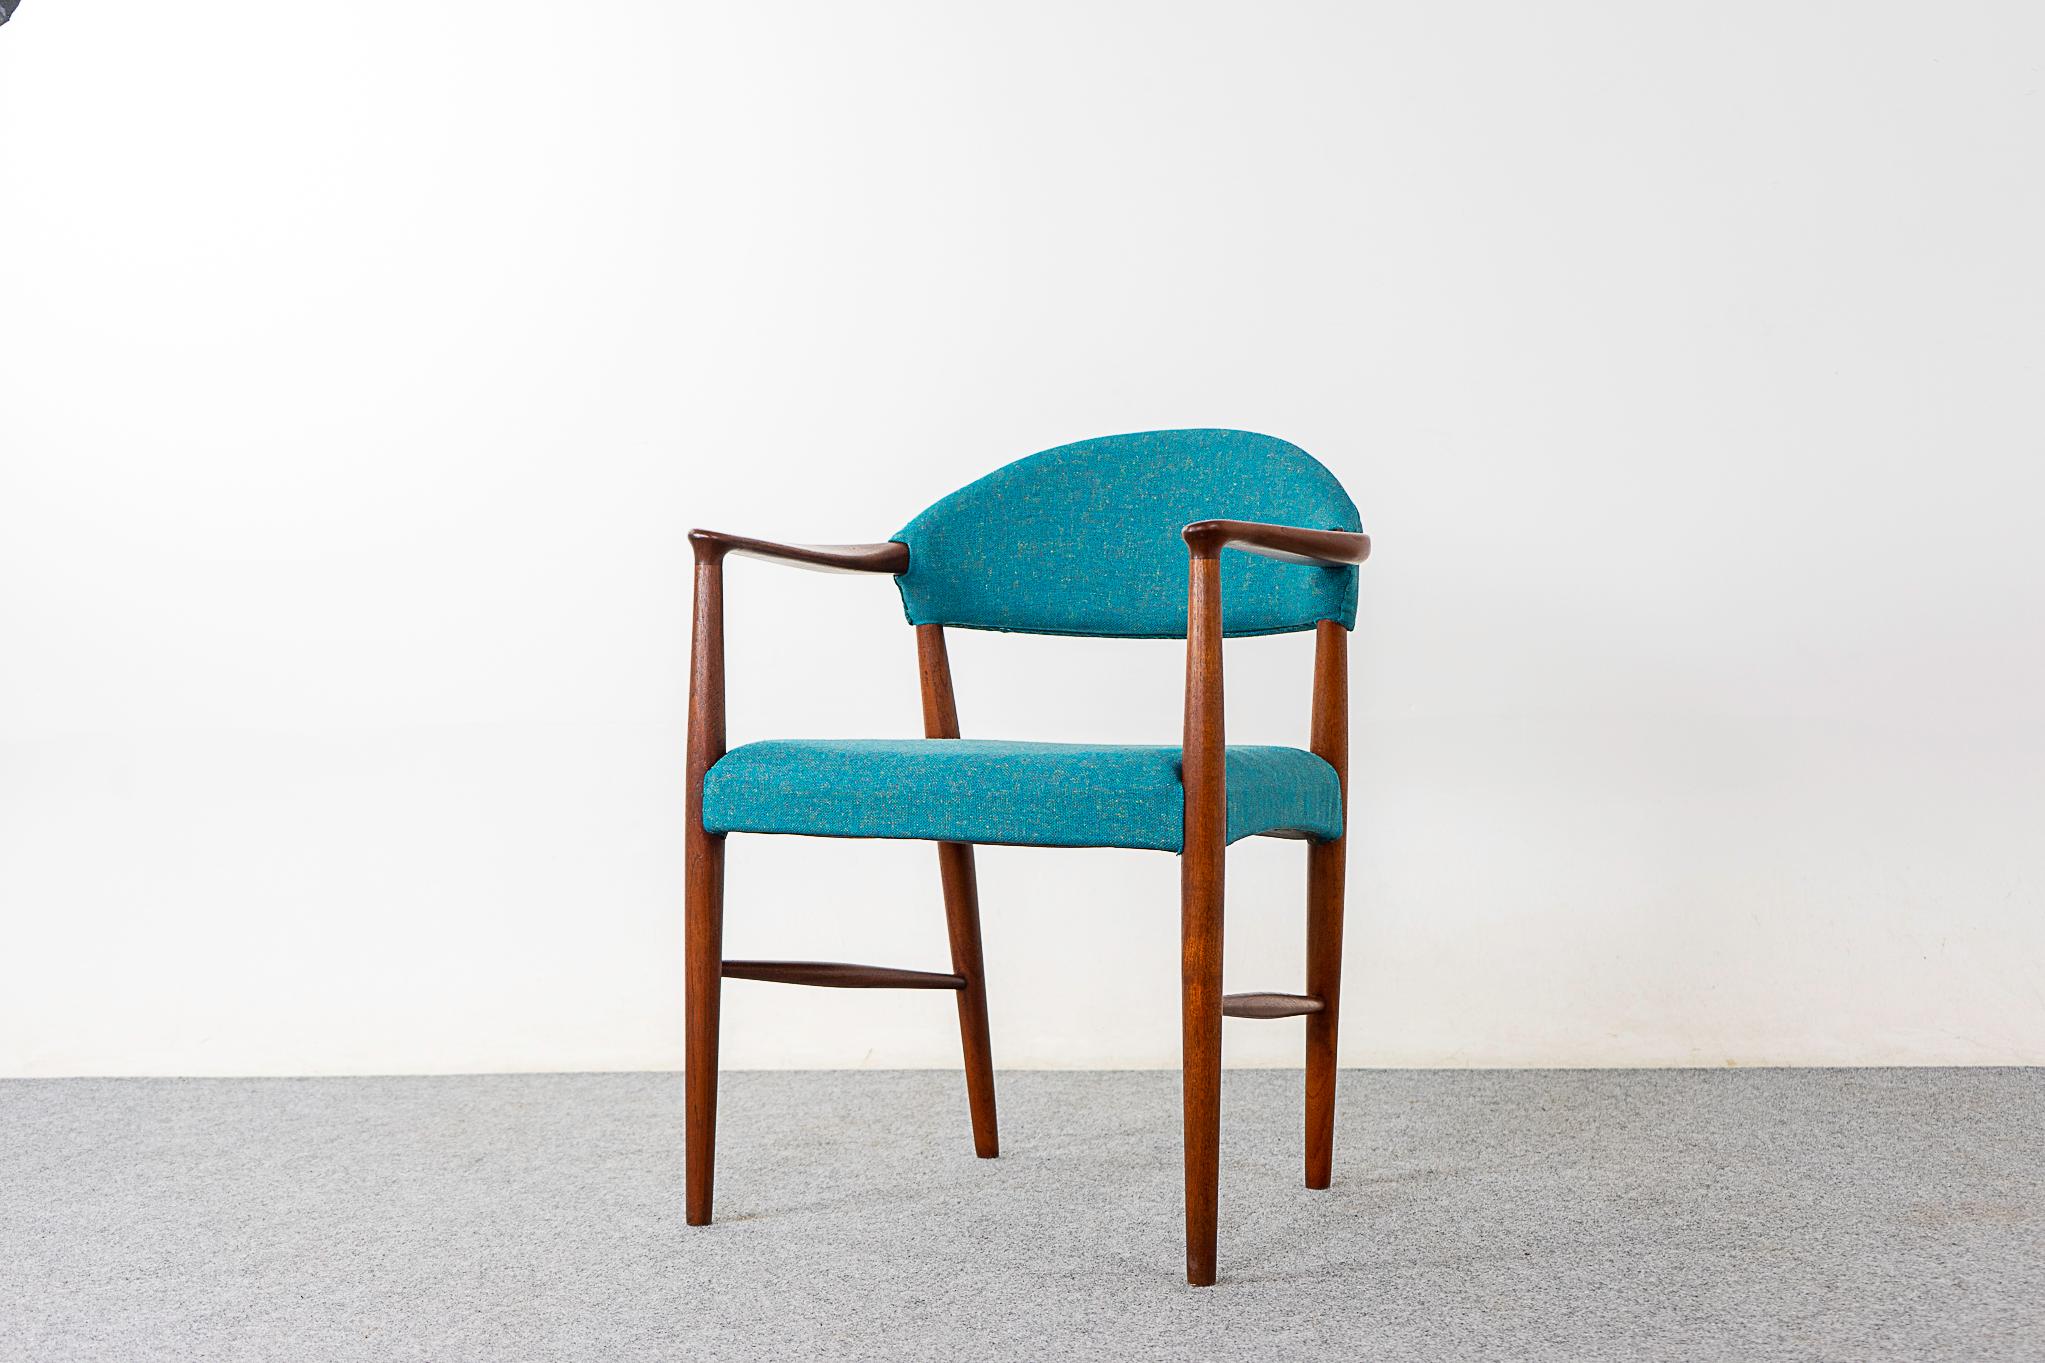 Teak Model 223 Danish arm chair by Kurt Olsen, circa 1960's. Sculptural solid wood frame with elegant details. Splayed tapering legs with spindle cross bars. Lovely teal upholstery in a blend of 70% pure new wool and 30% flax.

Please inquire for